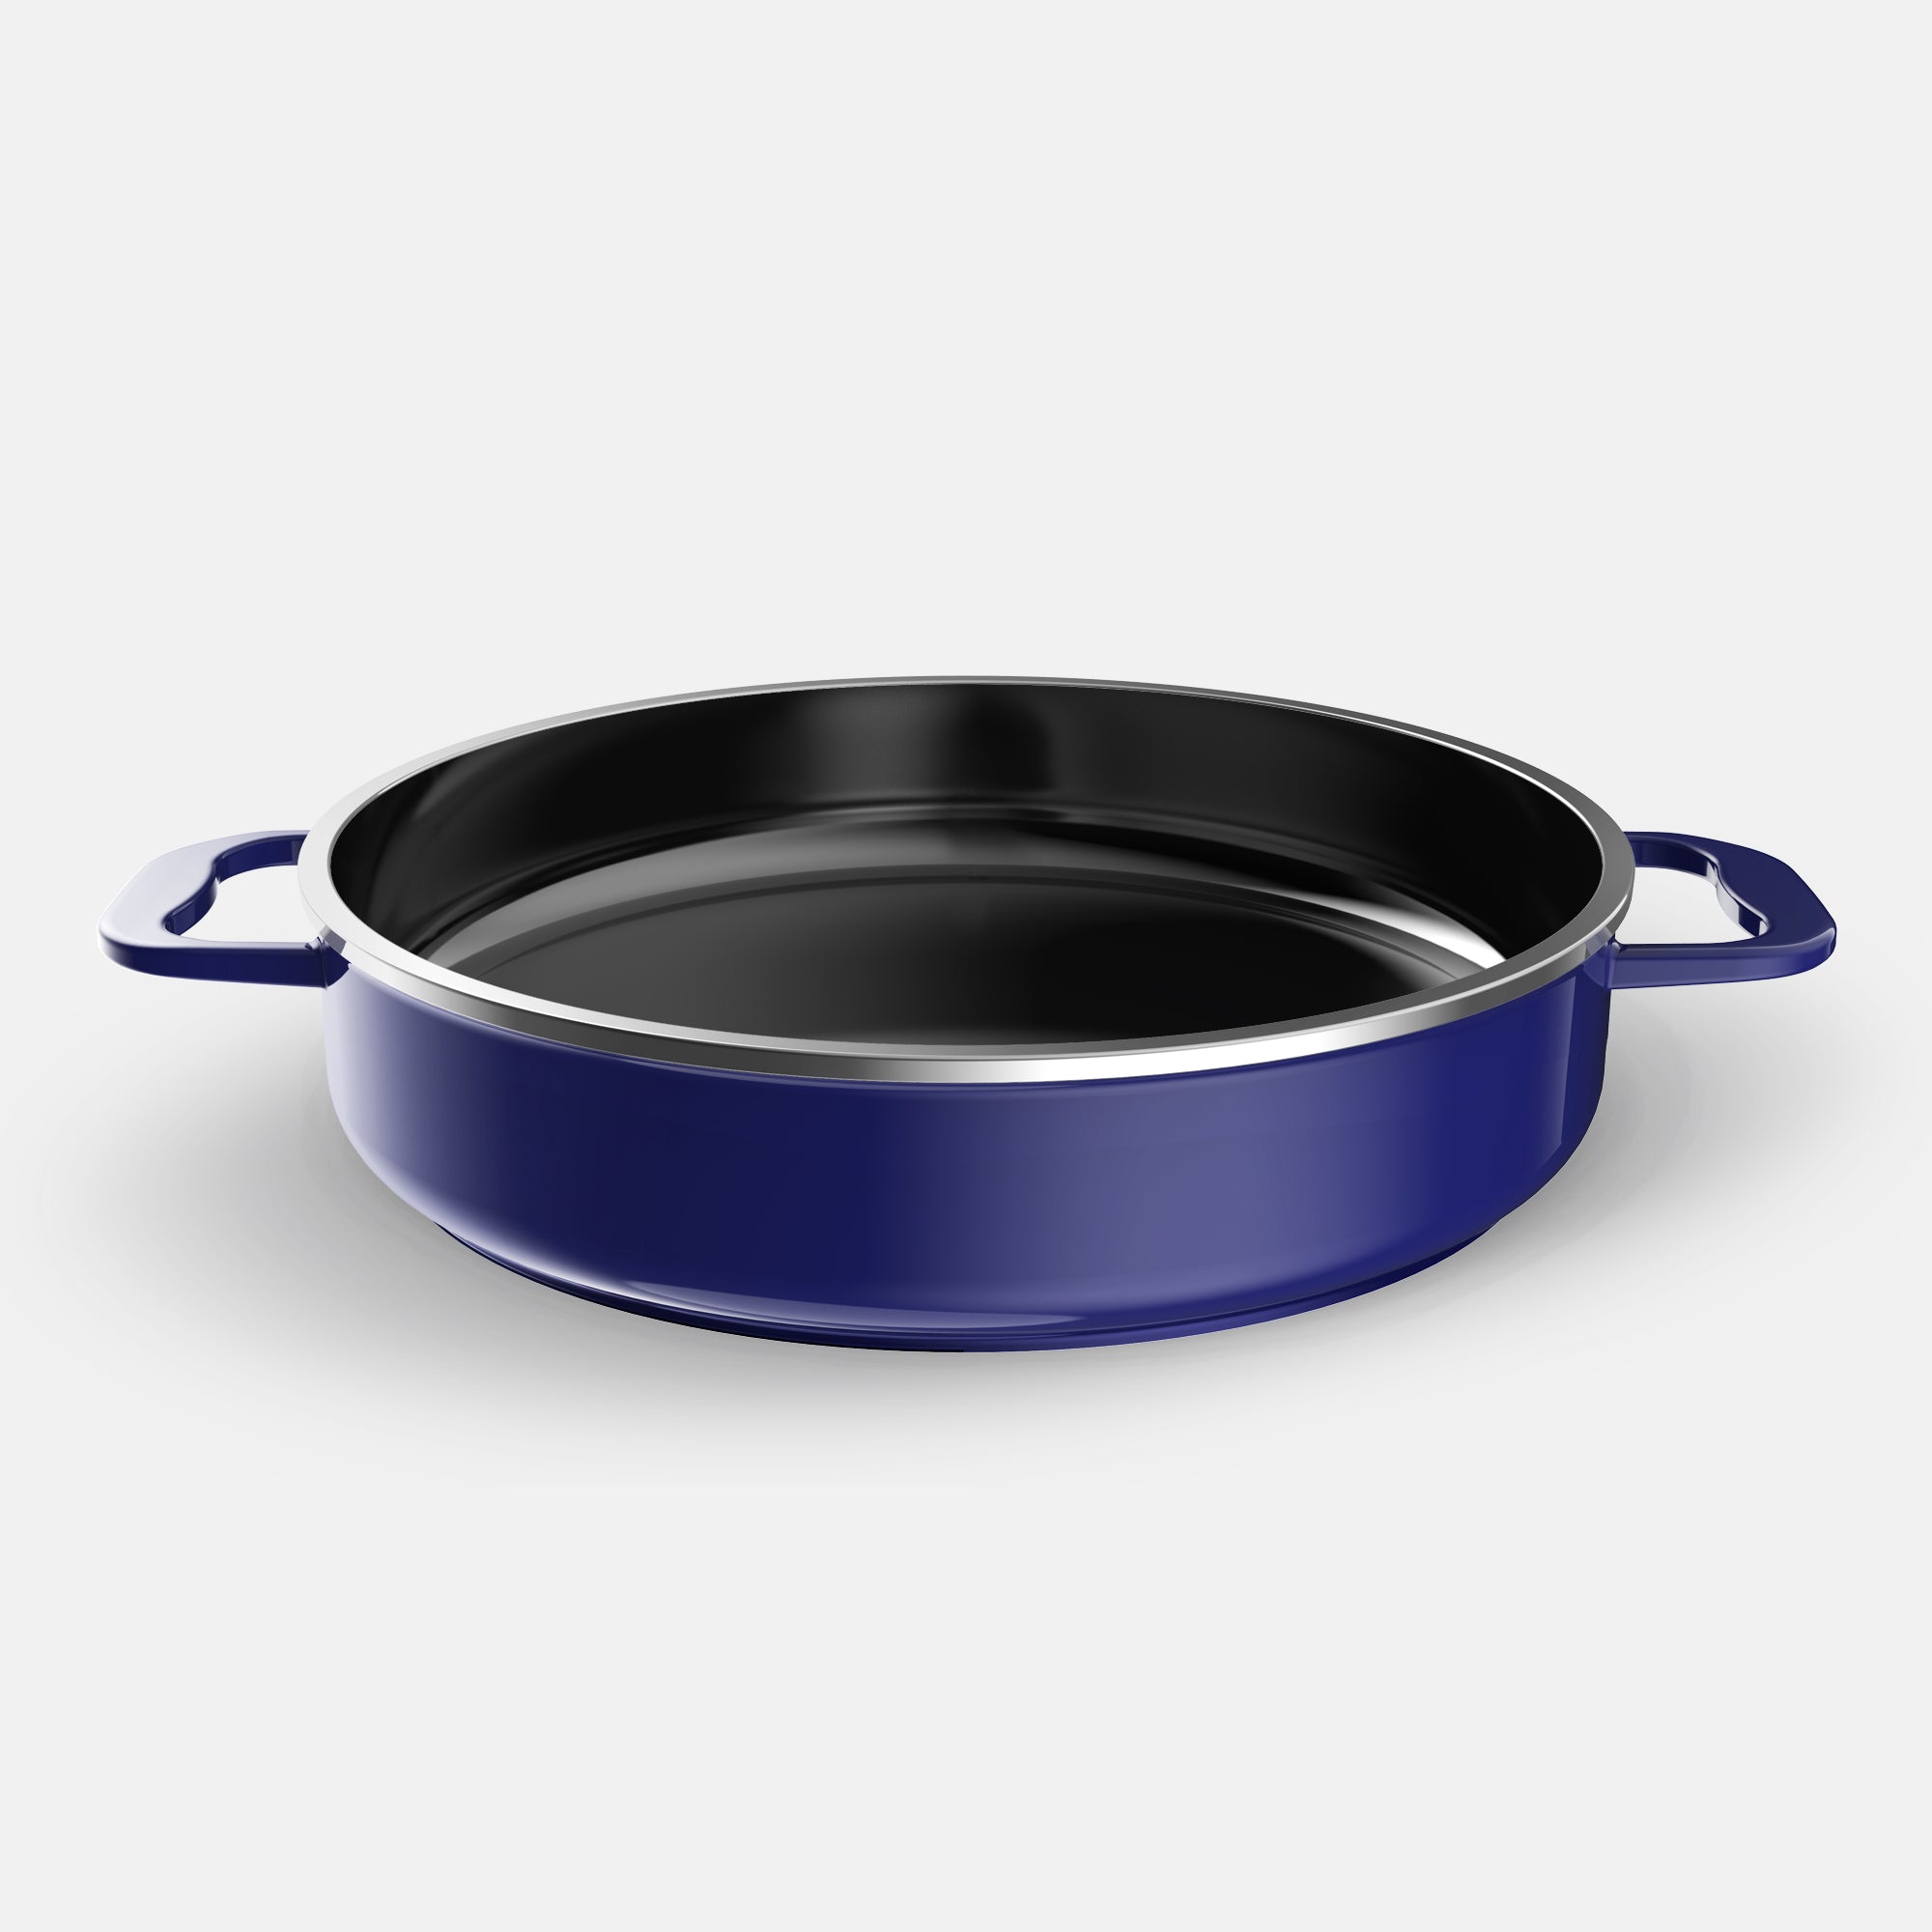 Hesslebach: Truly Non-Toxic Cookware- Dutch Oven, Grill, Pan